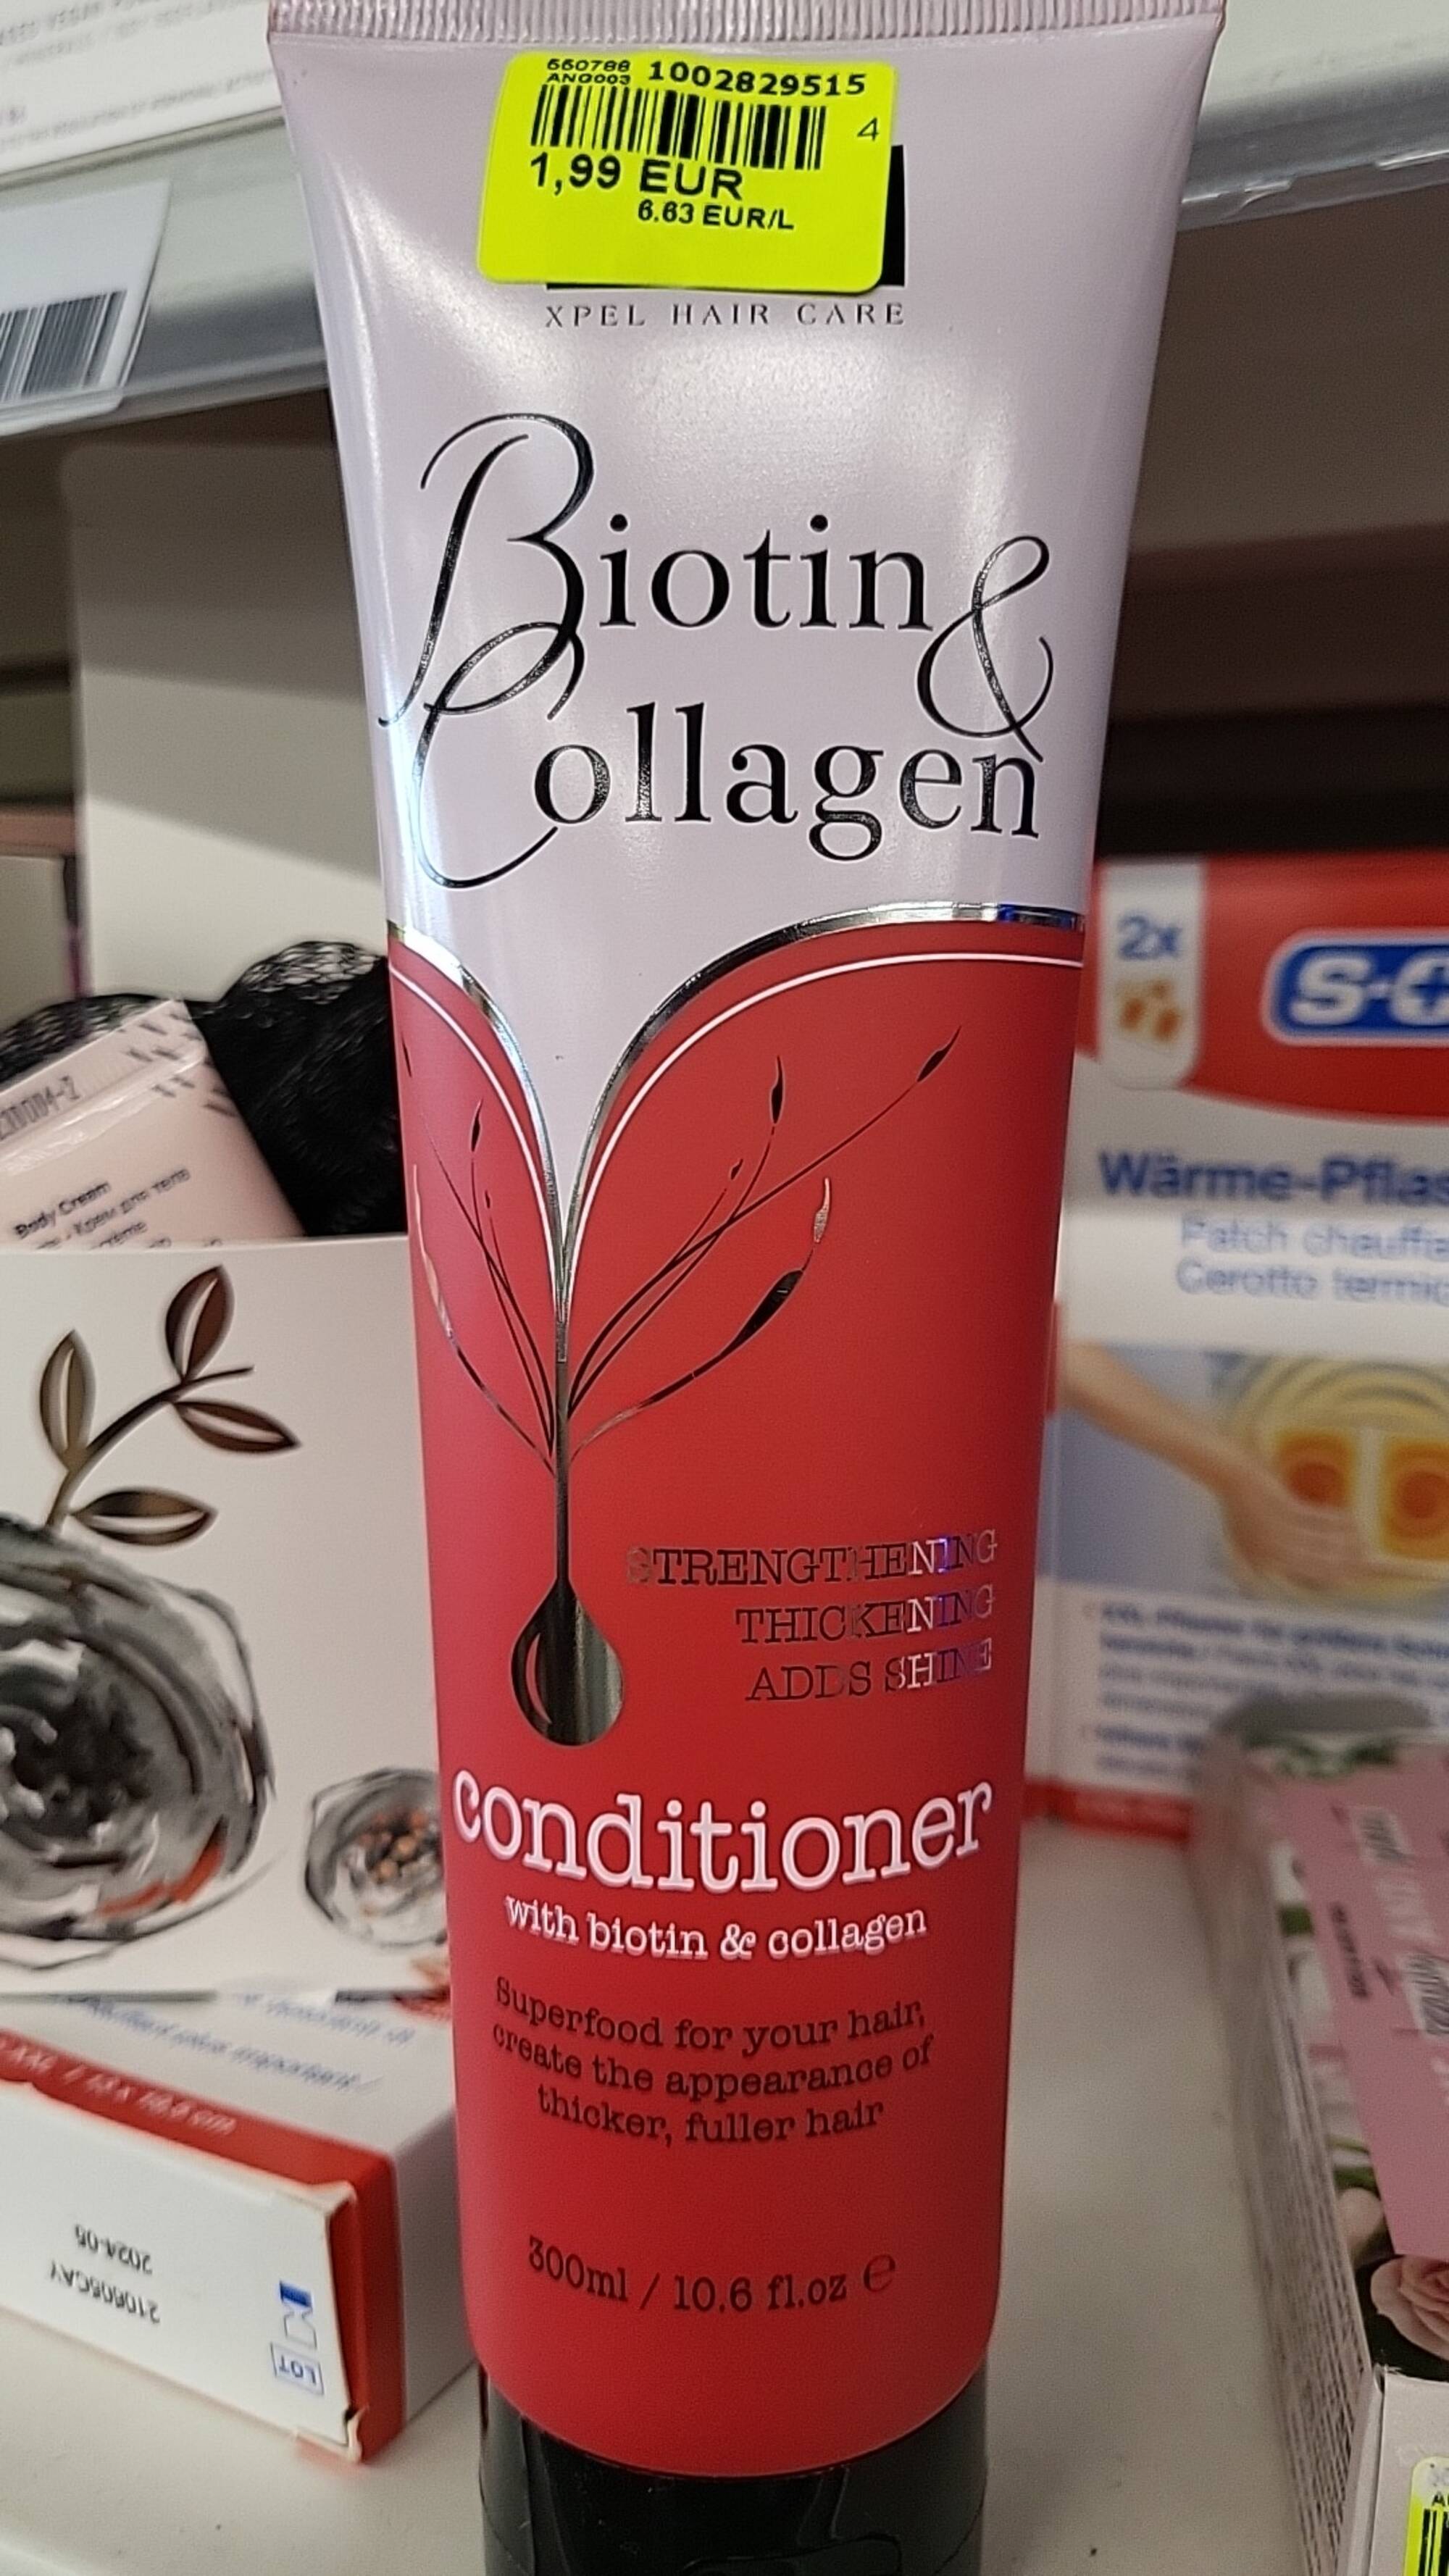 XPEL HAIR CARE - Conditioner with biotin & collagen